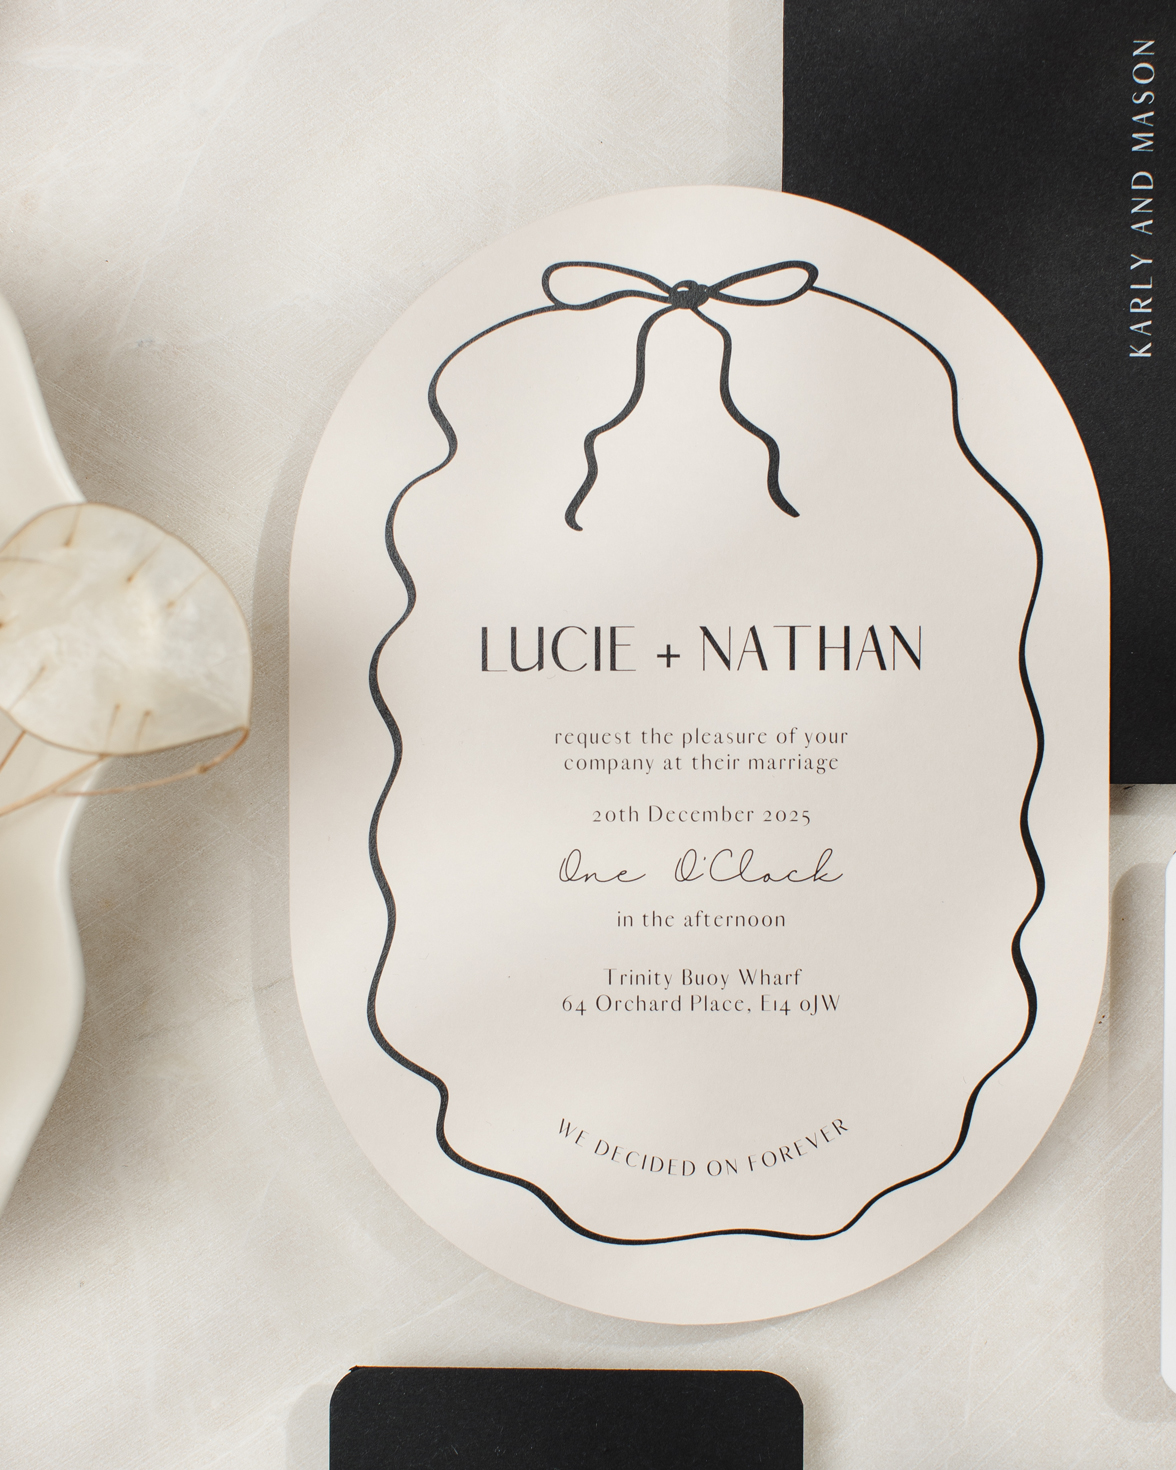 Double arch shape almond and black wedding invitation with hand drawn squiggly line border and bow. Black envelope with white ink